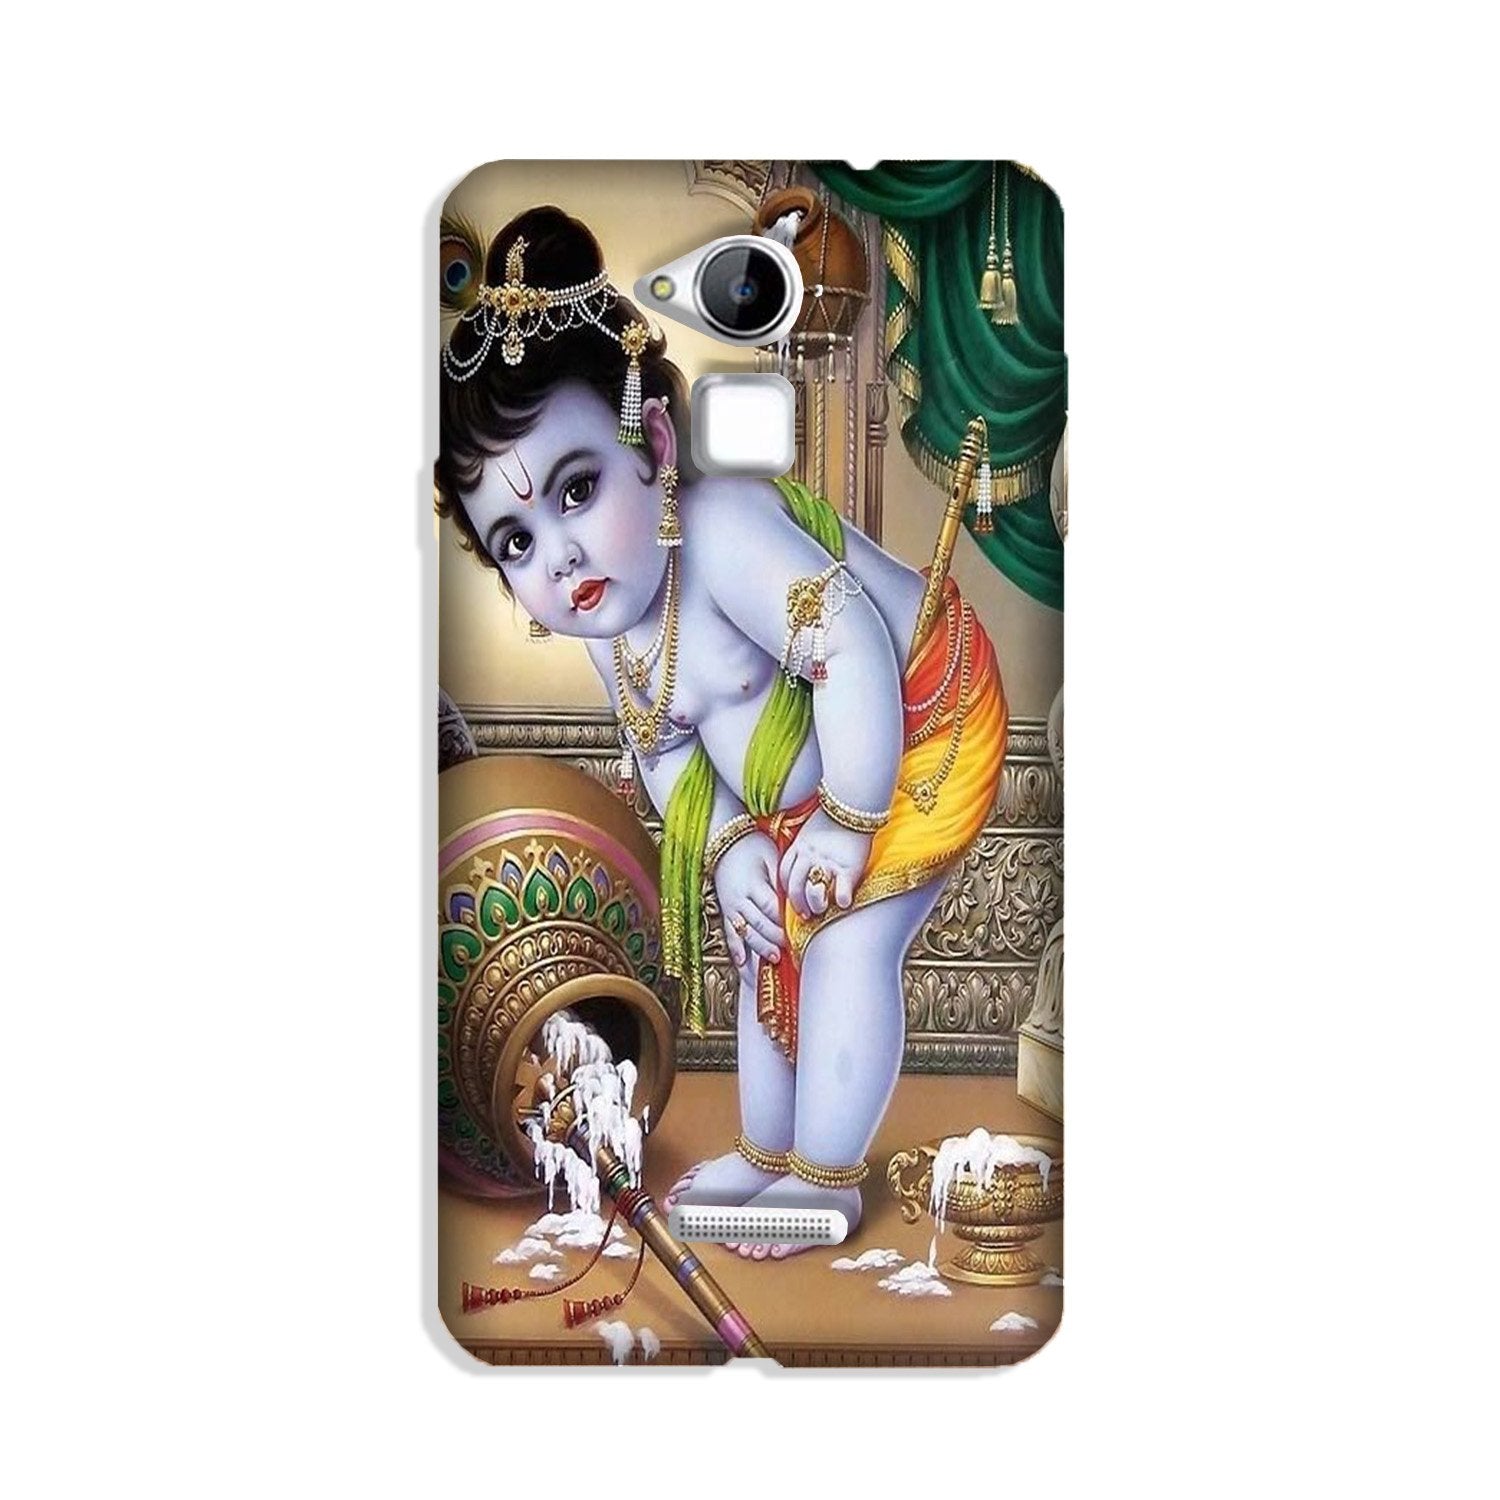 Bal Gopal Case for Coolpad Note 3